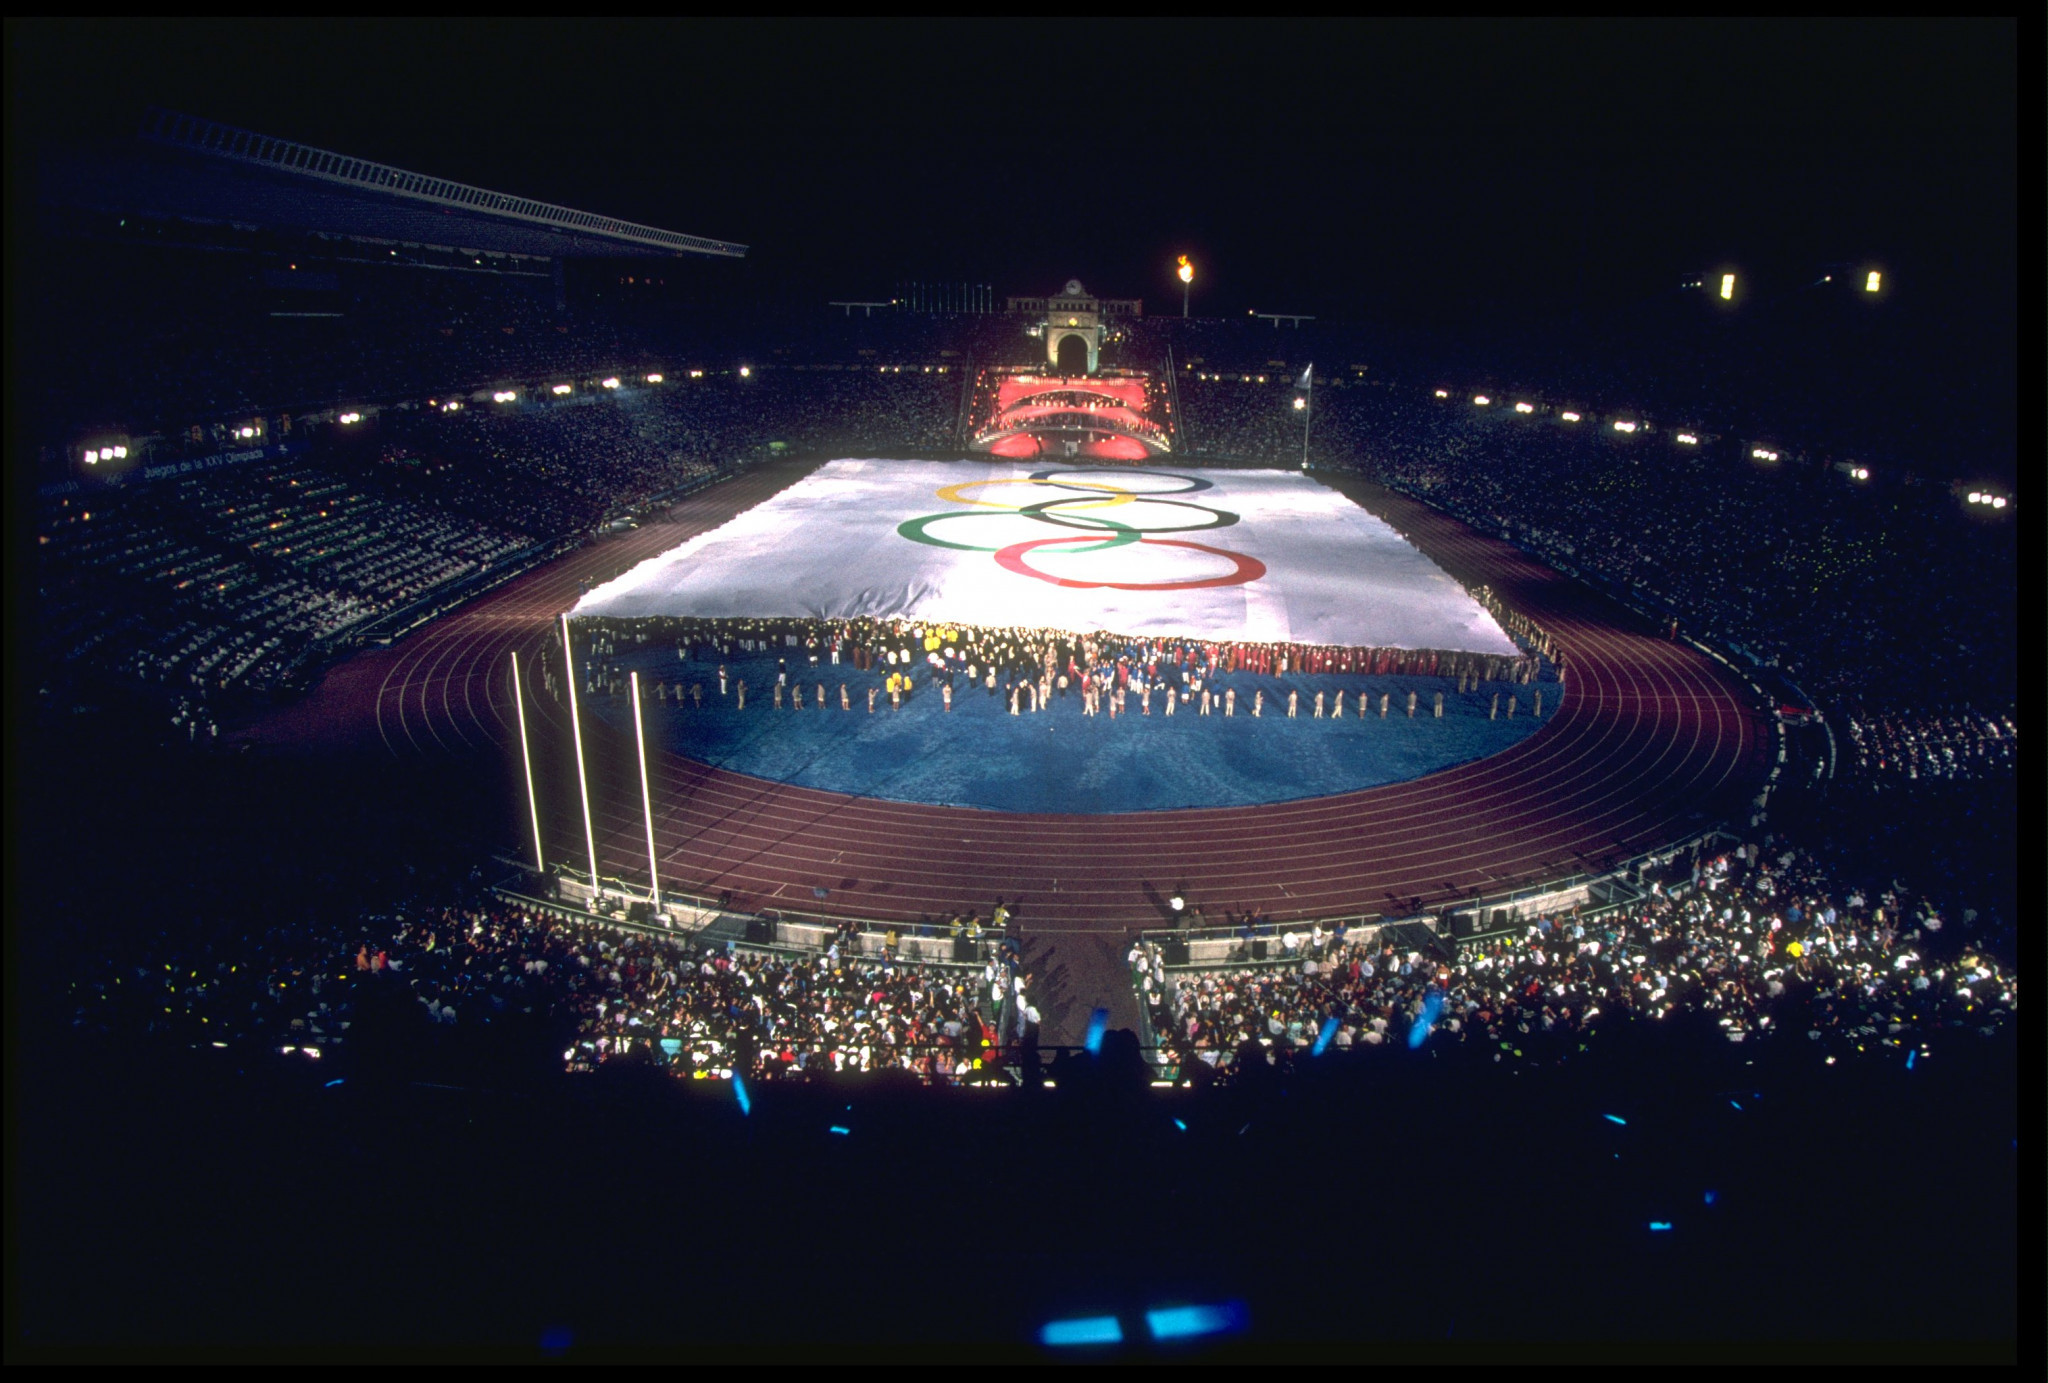 1992 host city Barcelona hopes to stage the 2030 Winter Games © Getty Images